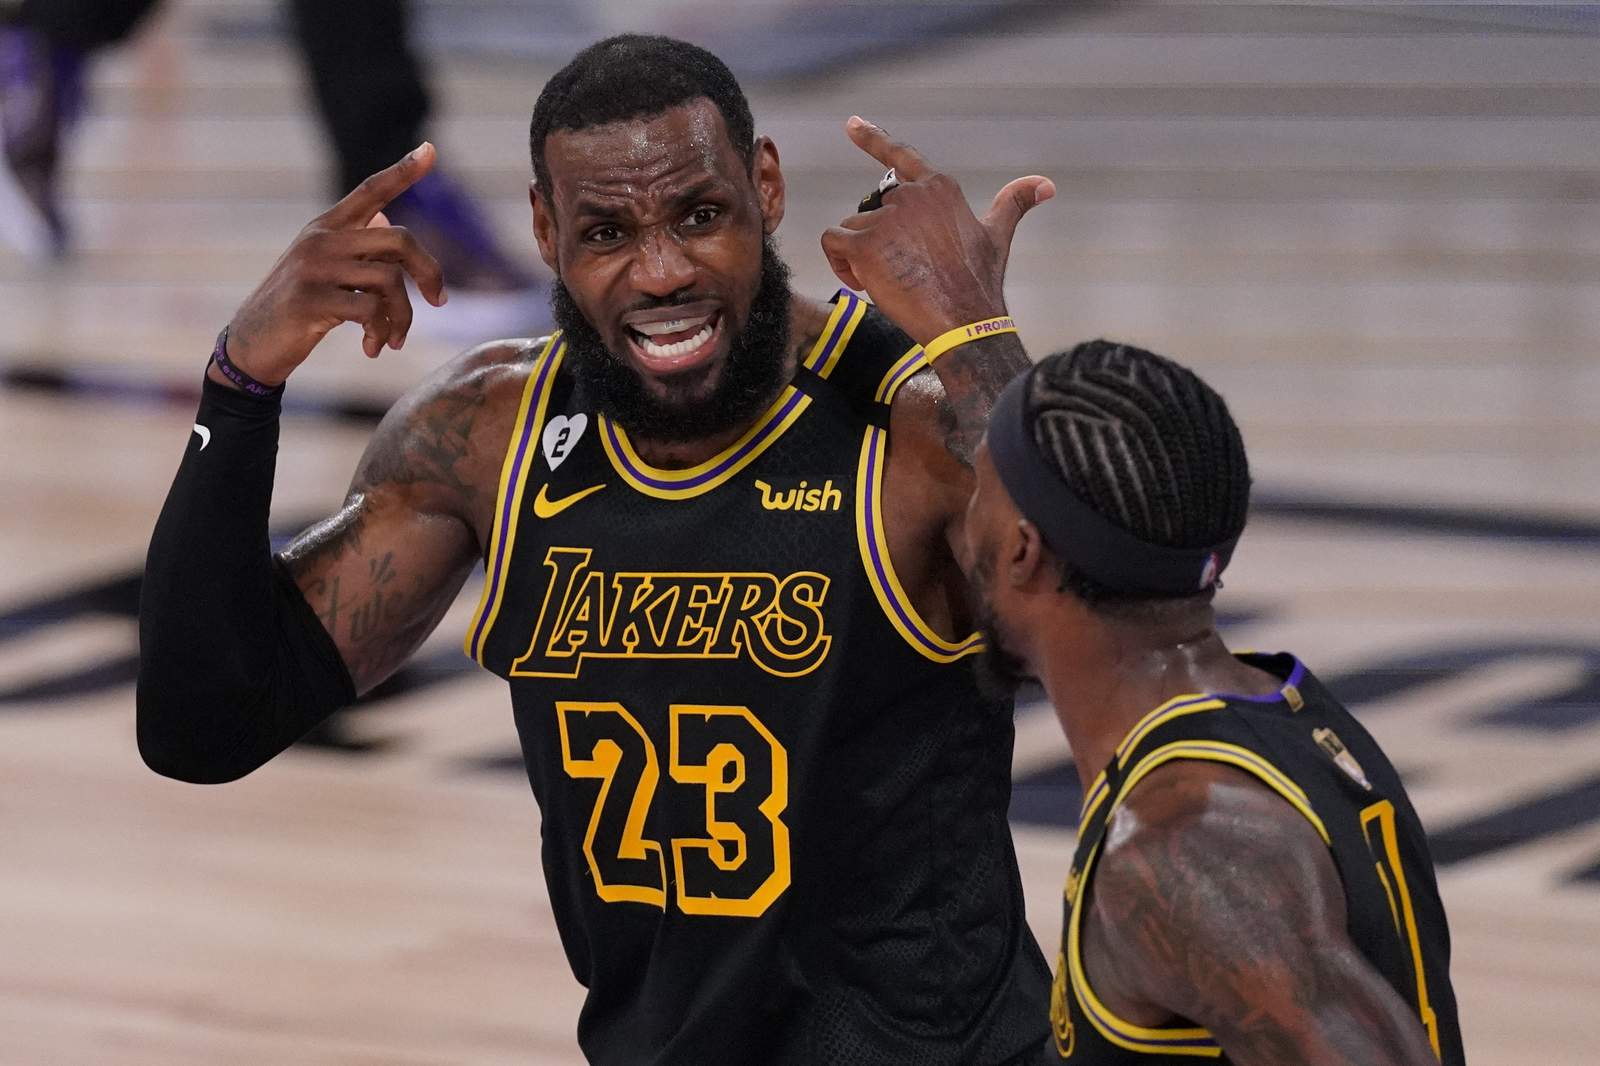 King James scores 40, but a Lakers coronation has to wait